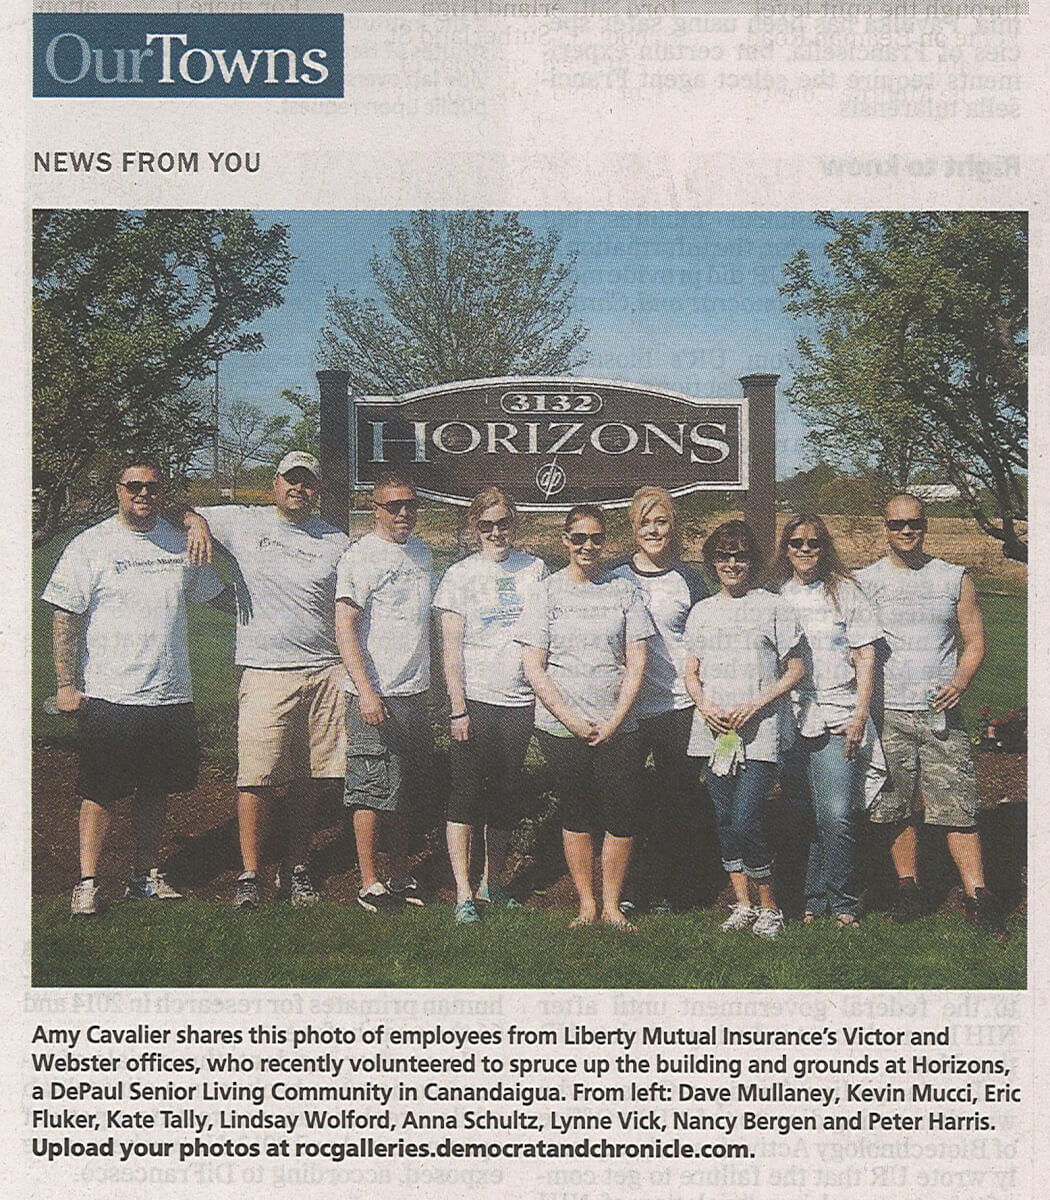 Horizons Day of Caring Story in OurTowns on May 29, 2015